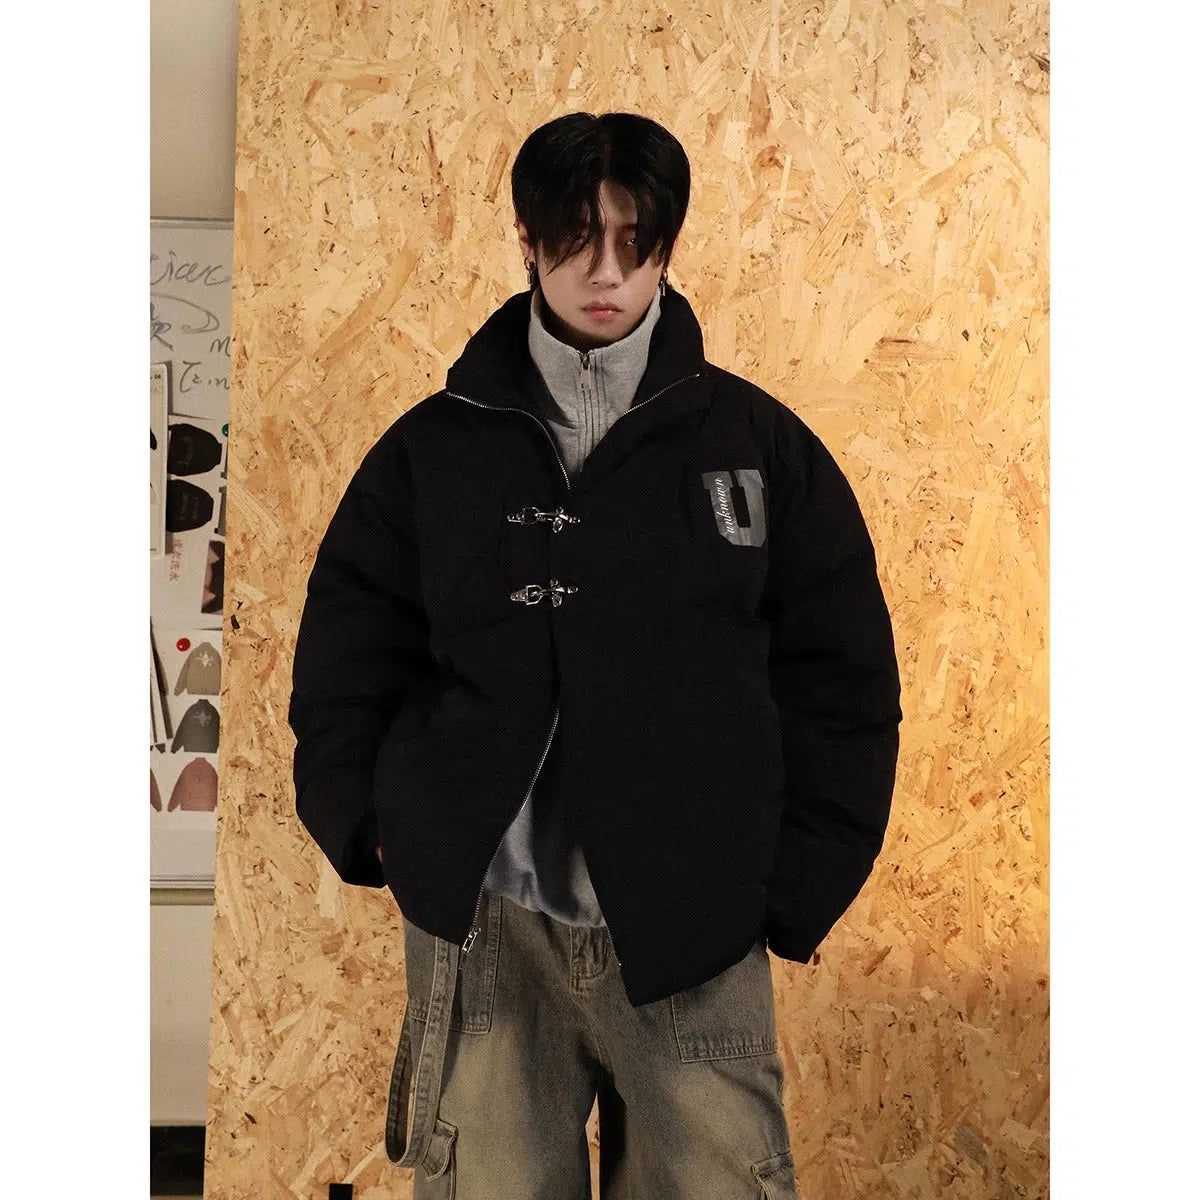 Metallic Buckle Lettered Puffer Jacket Korean Street Fashion Jacket By Mr Nearly Shop Online at OH Vault